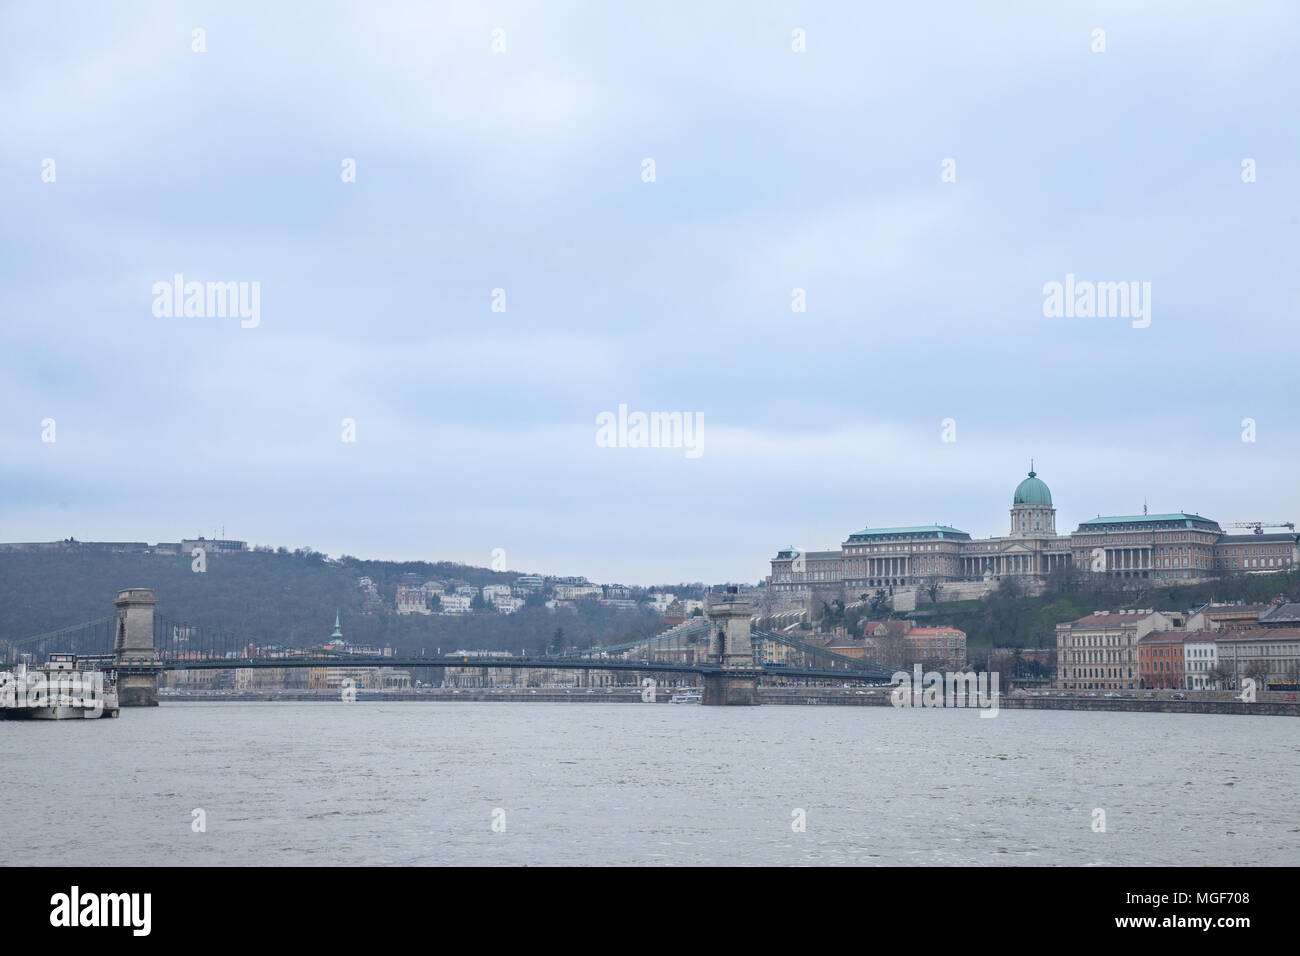 Buda Castle seen from Pest with the Danube and Szechenyi Chain Bridge in front.  The cast is the historical palace complex of the Hungarian kings   Pi Stock Photo